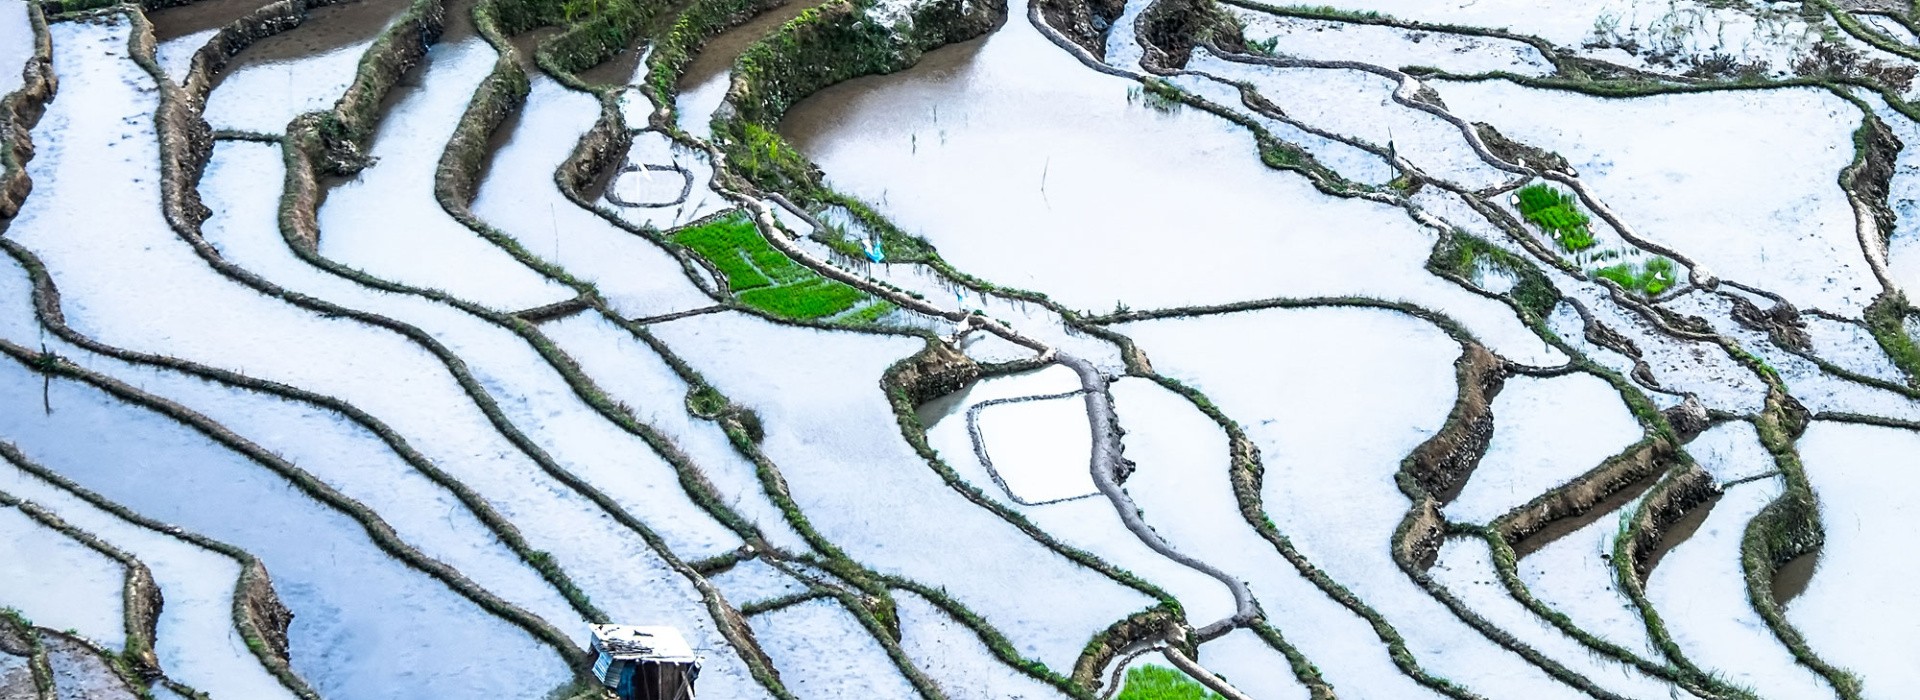 abstract rice terraces